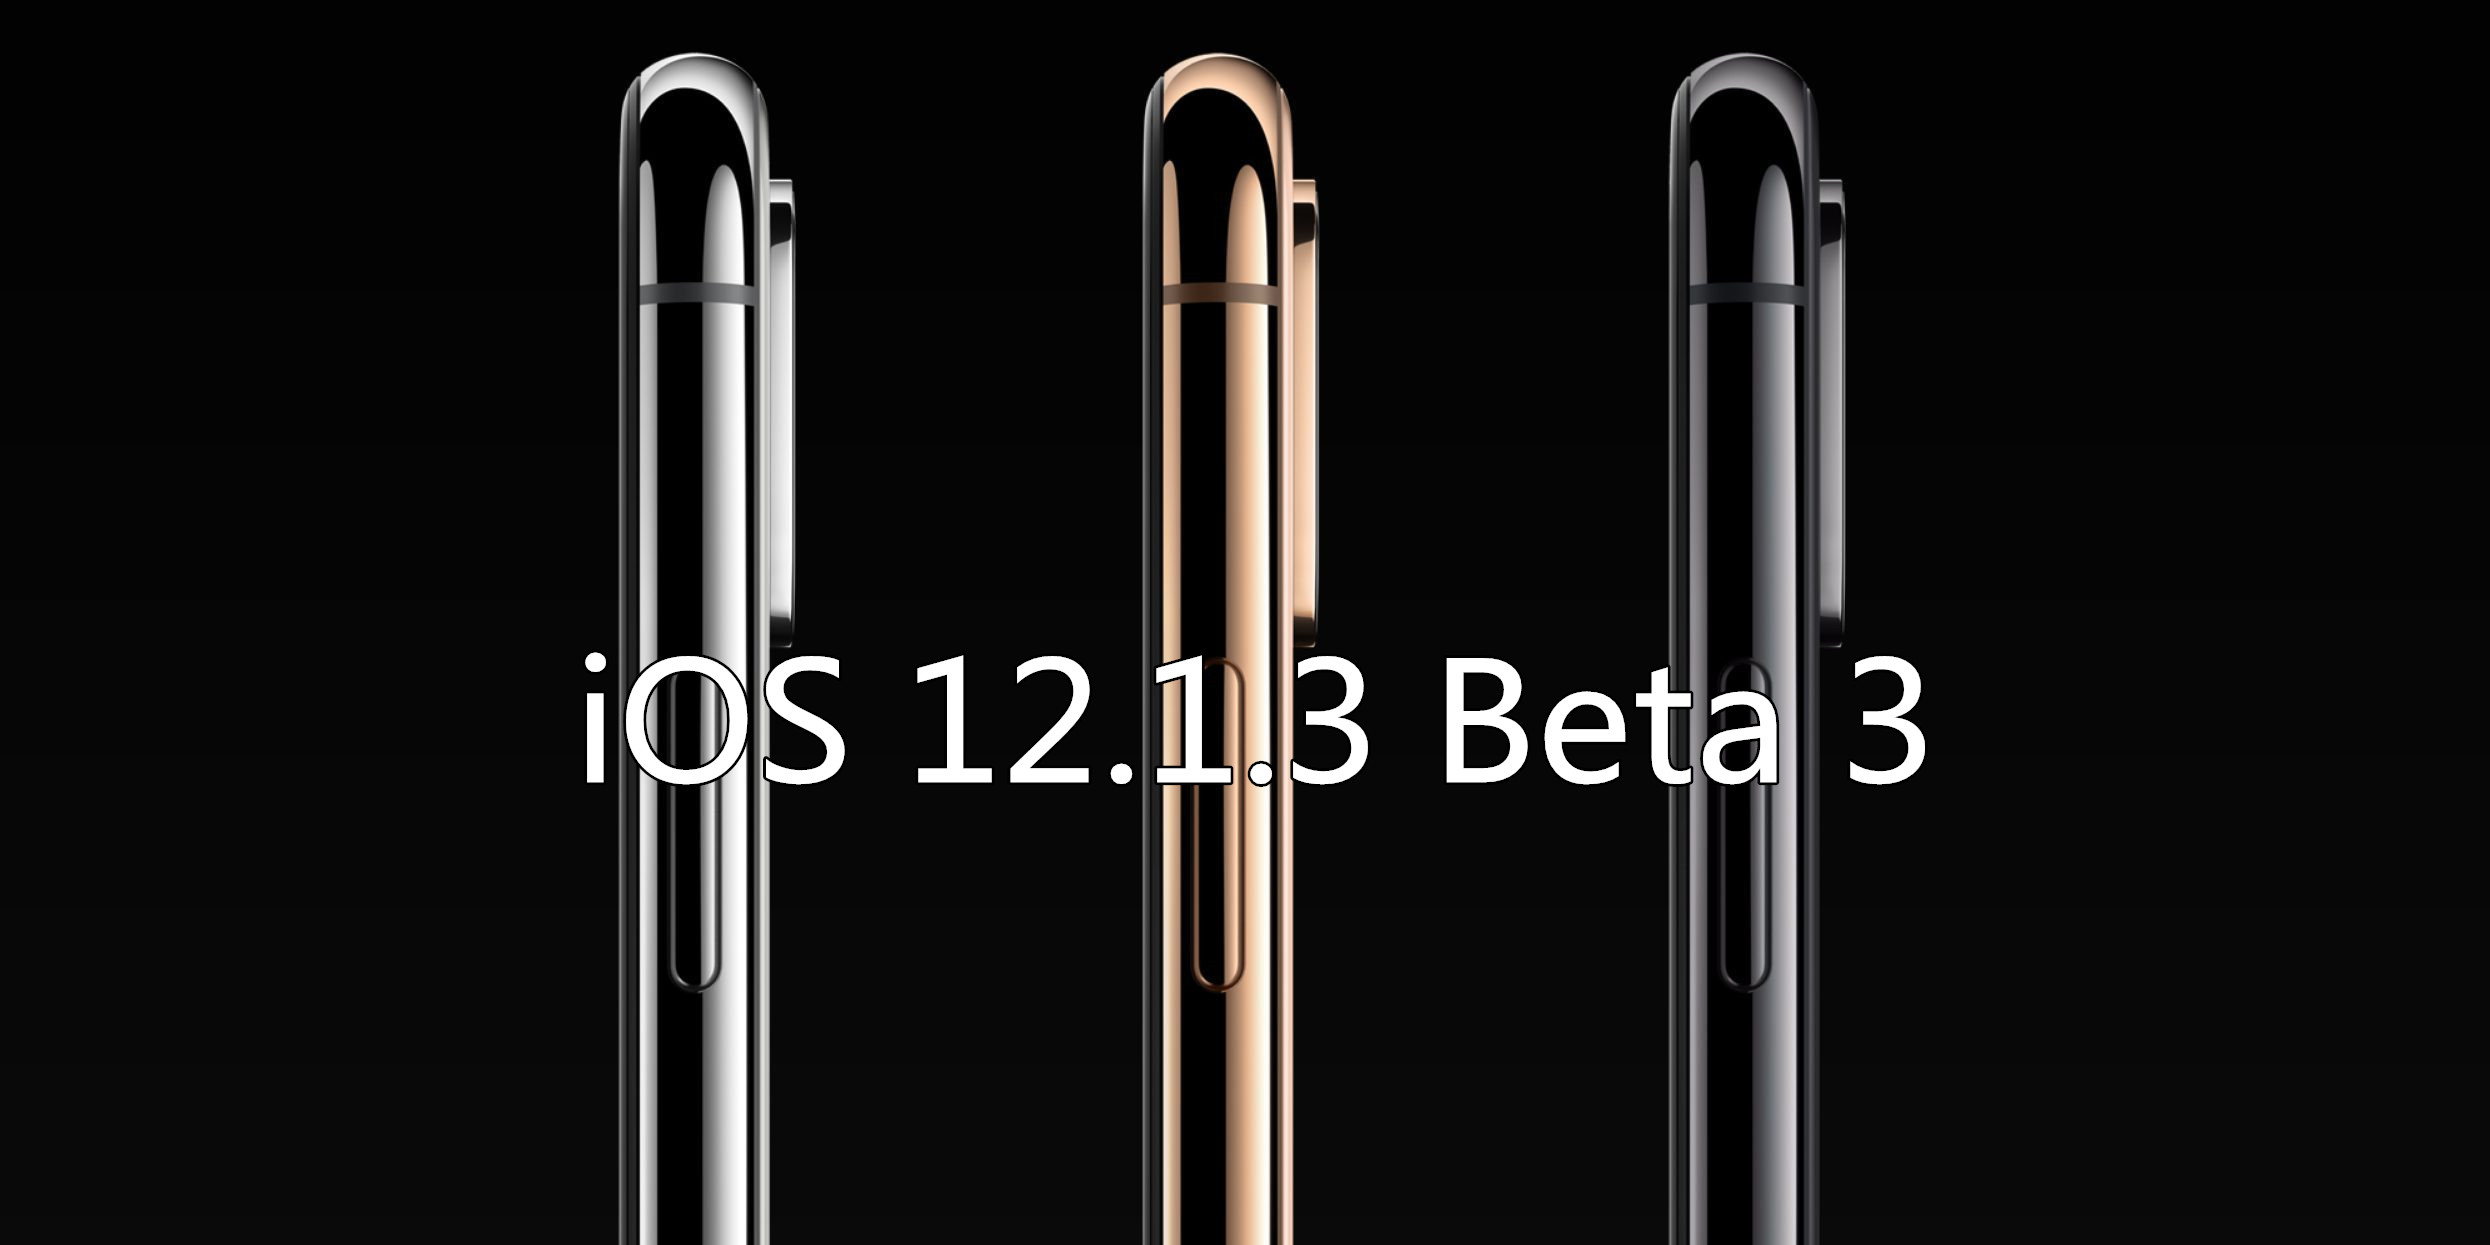 Apple Seeds Beta 3 Of iOS 12.1.3, watchOS 5.1.3 And tvOS 12.1.2 To Developers